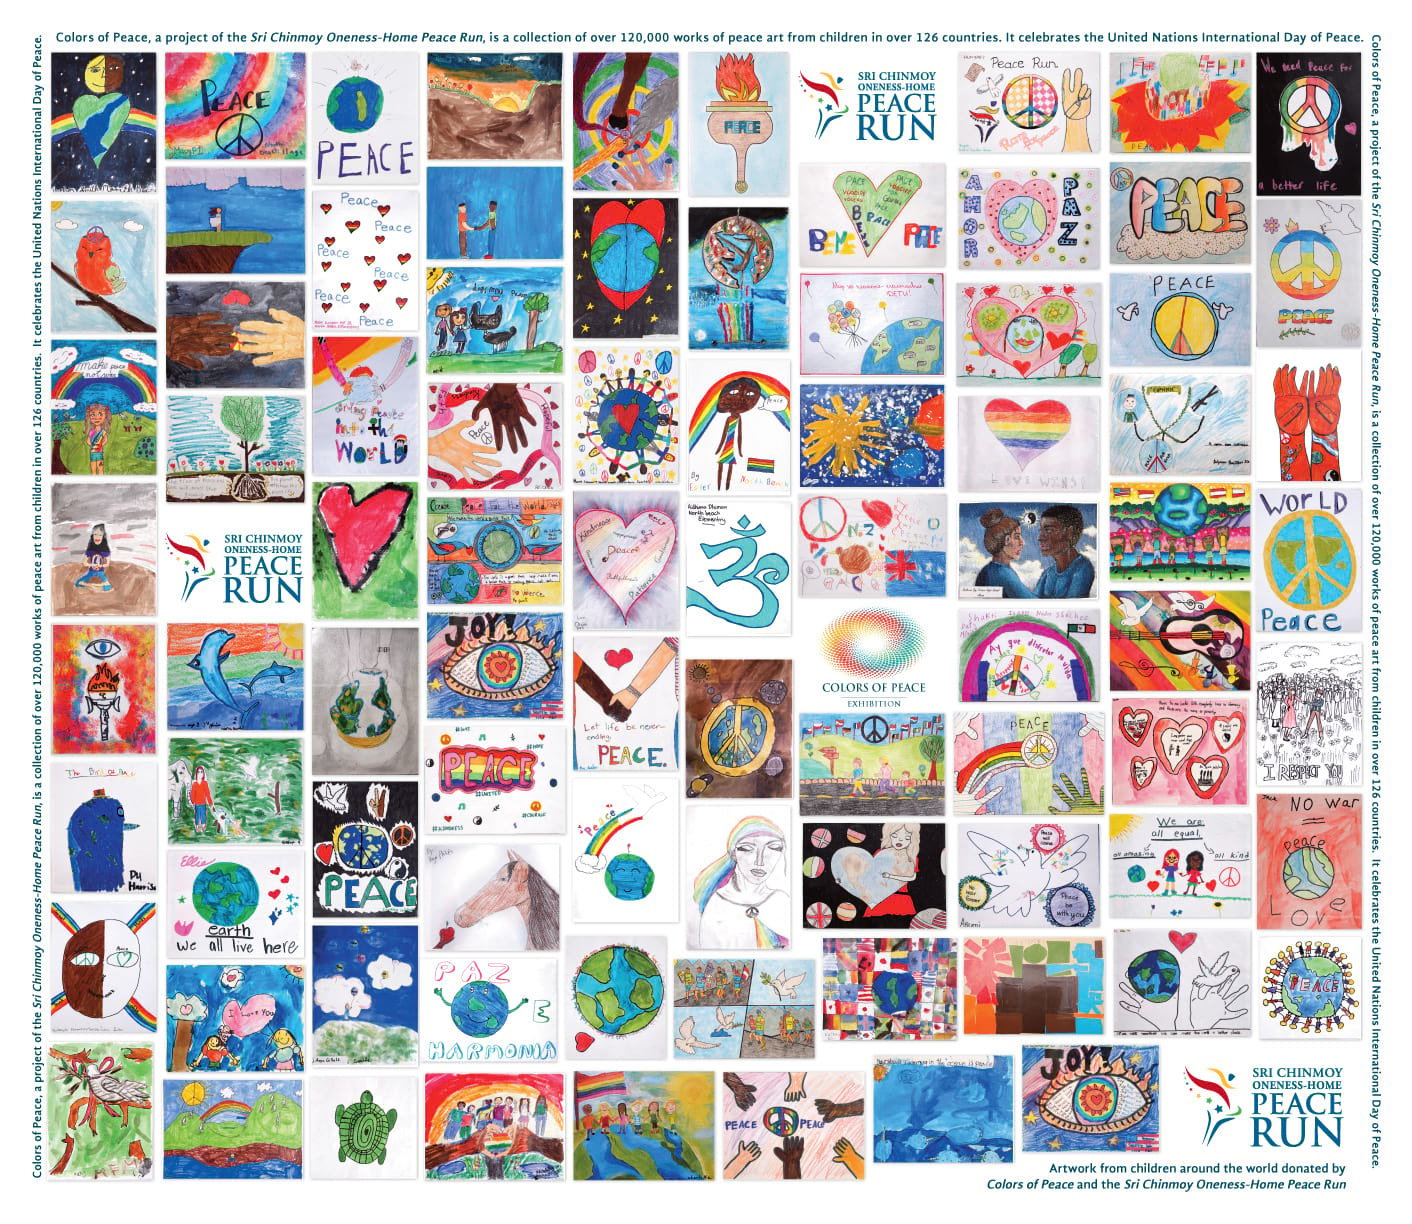 Collage of peace-themed artwork painted by children